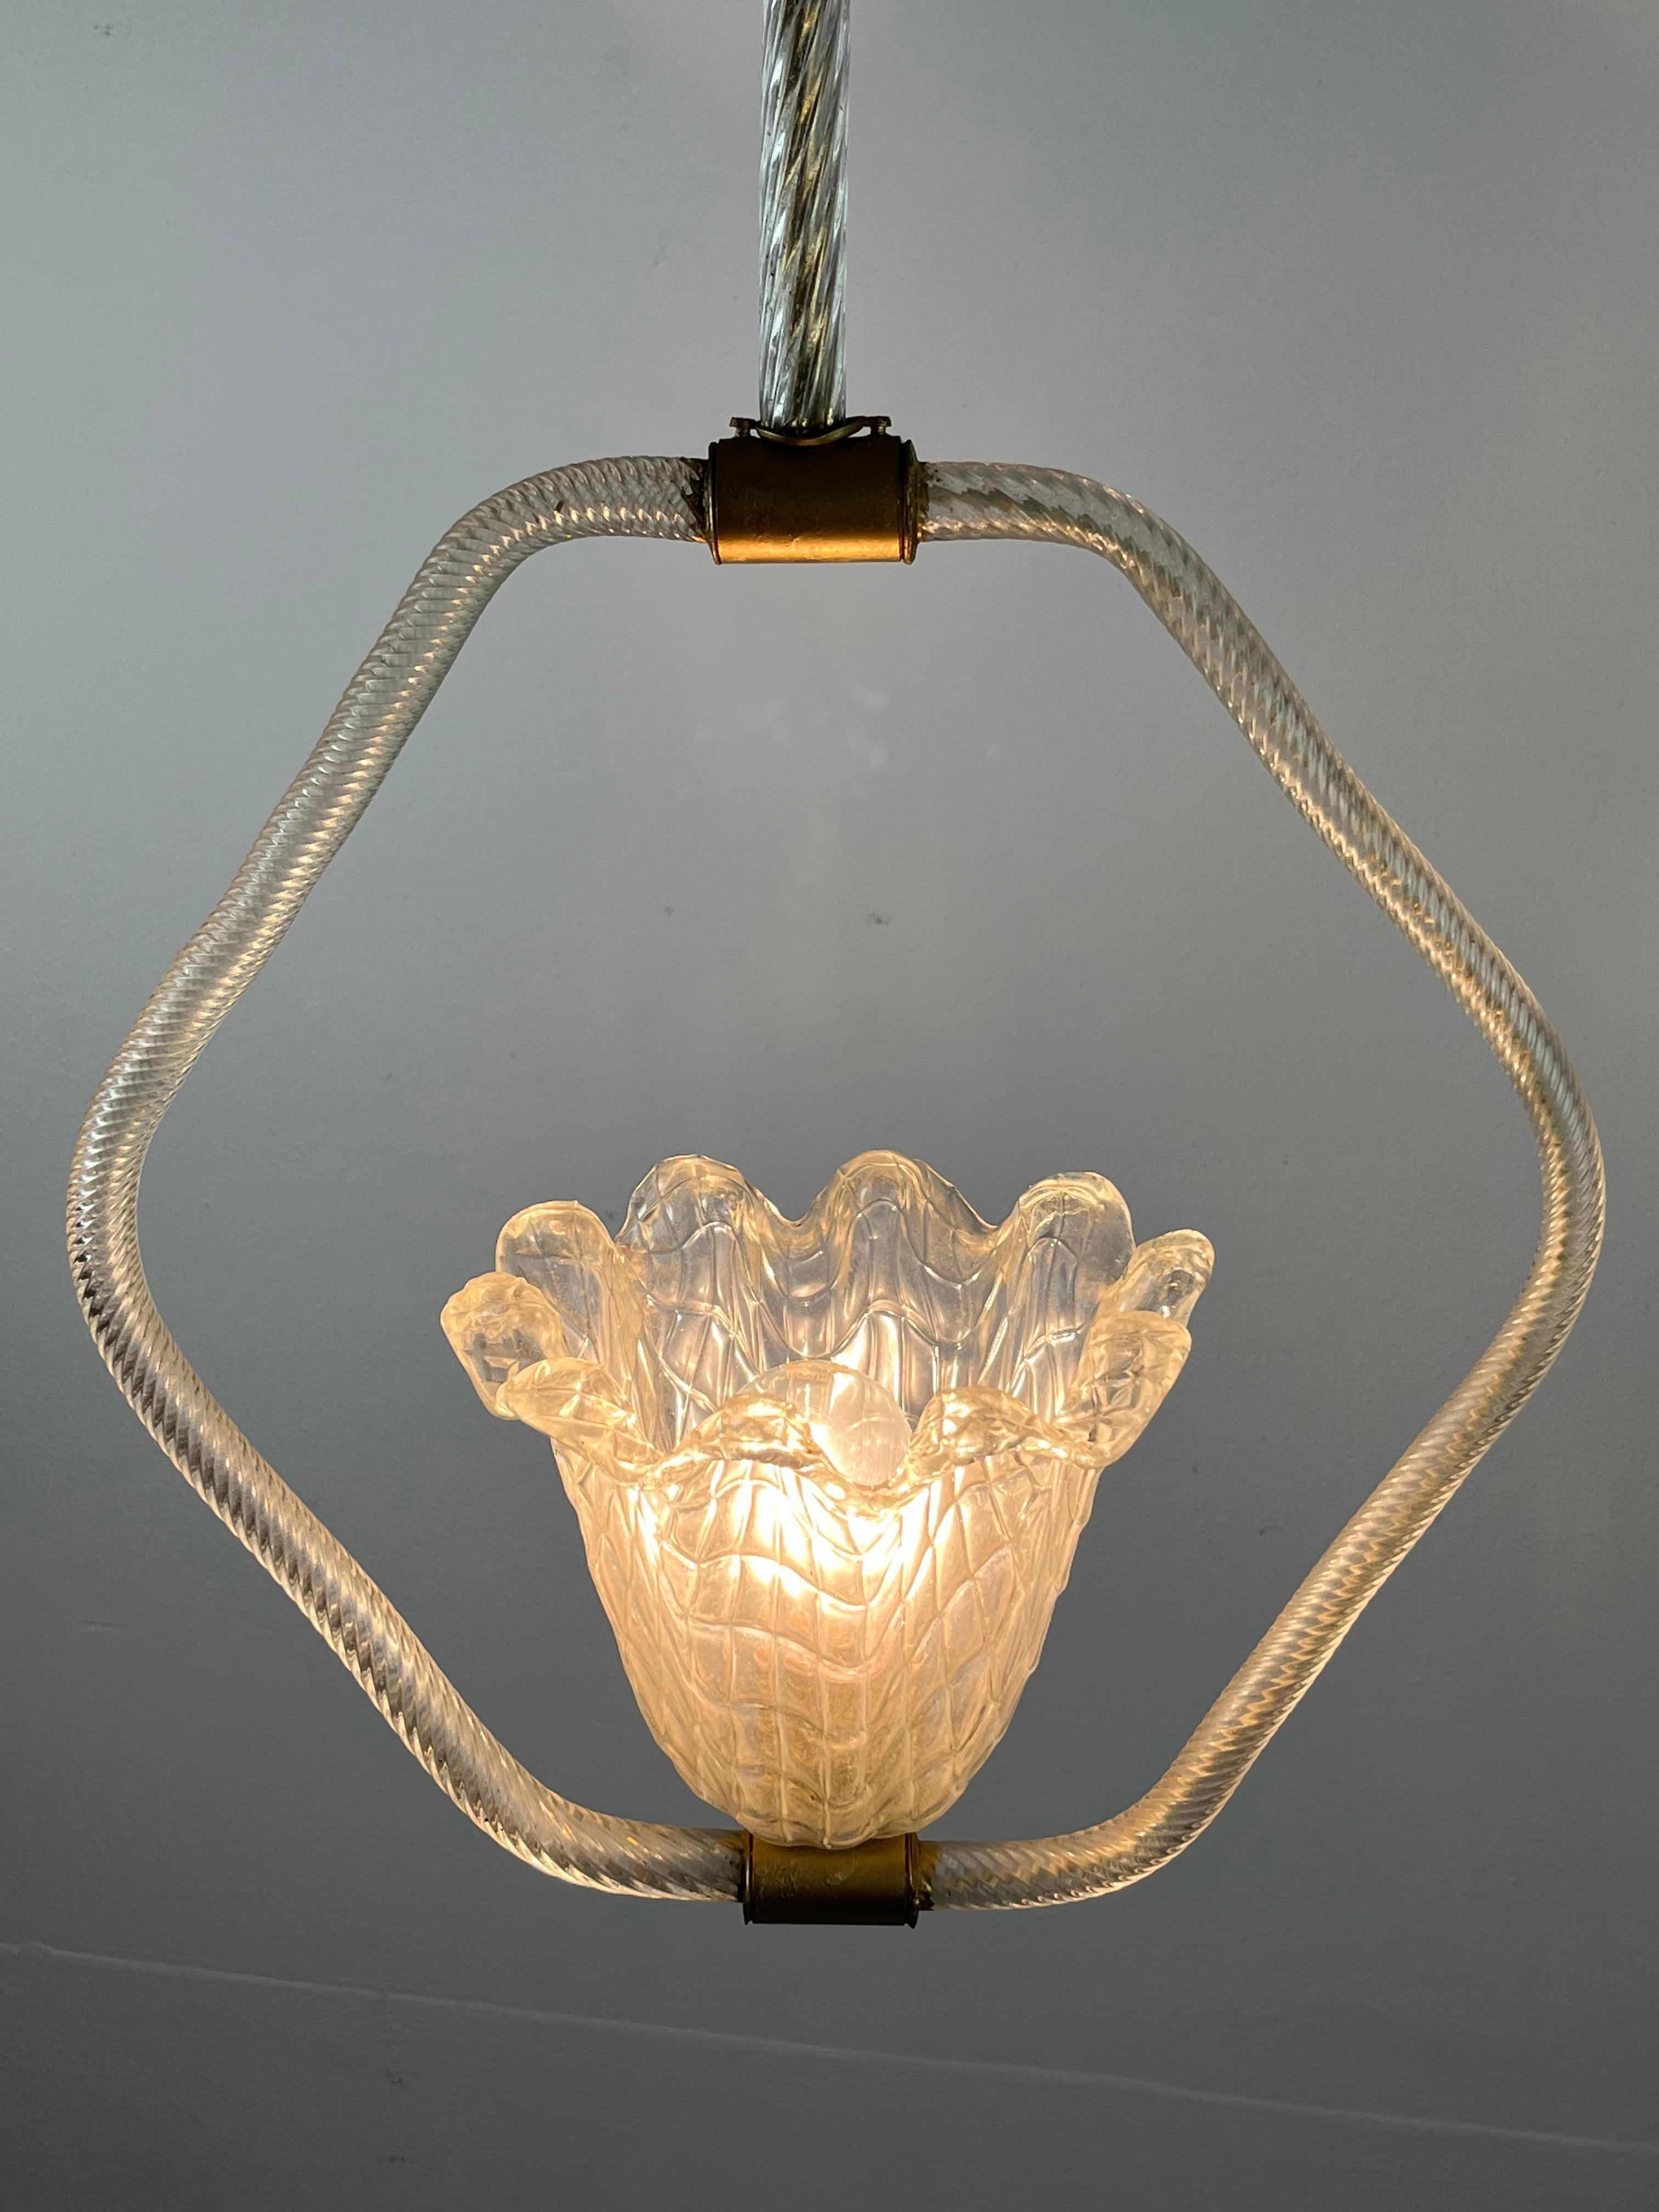 Italian Murano Glass Chandelier, Barovier & Toso, Italy, 1940s For Sale